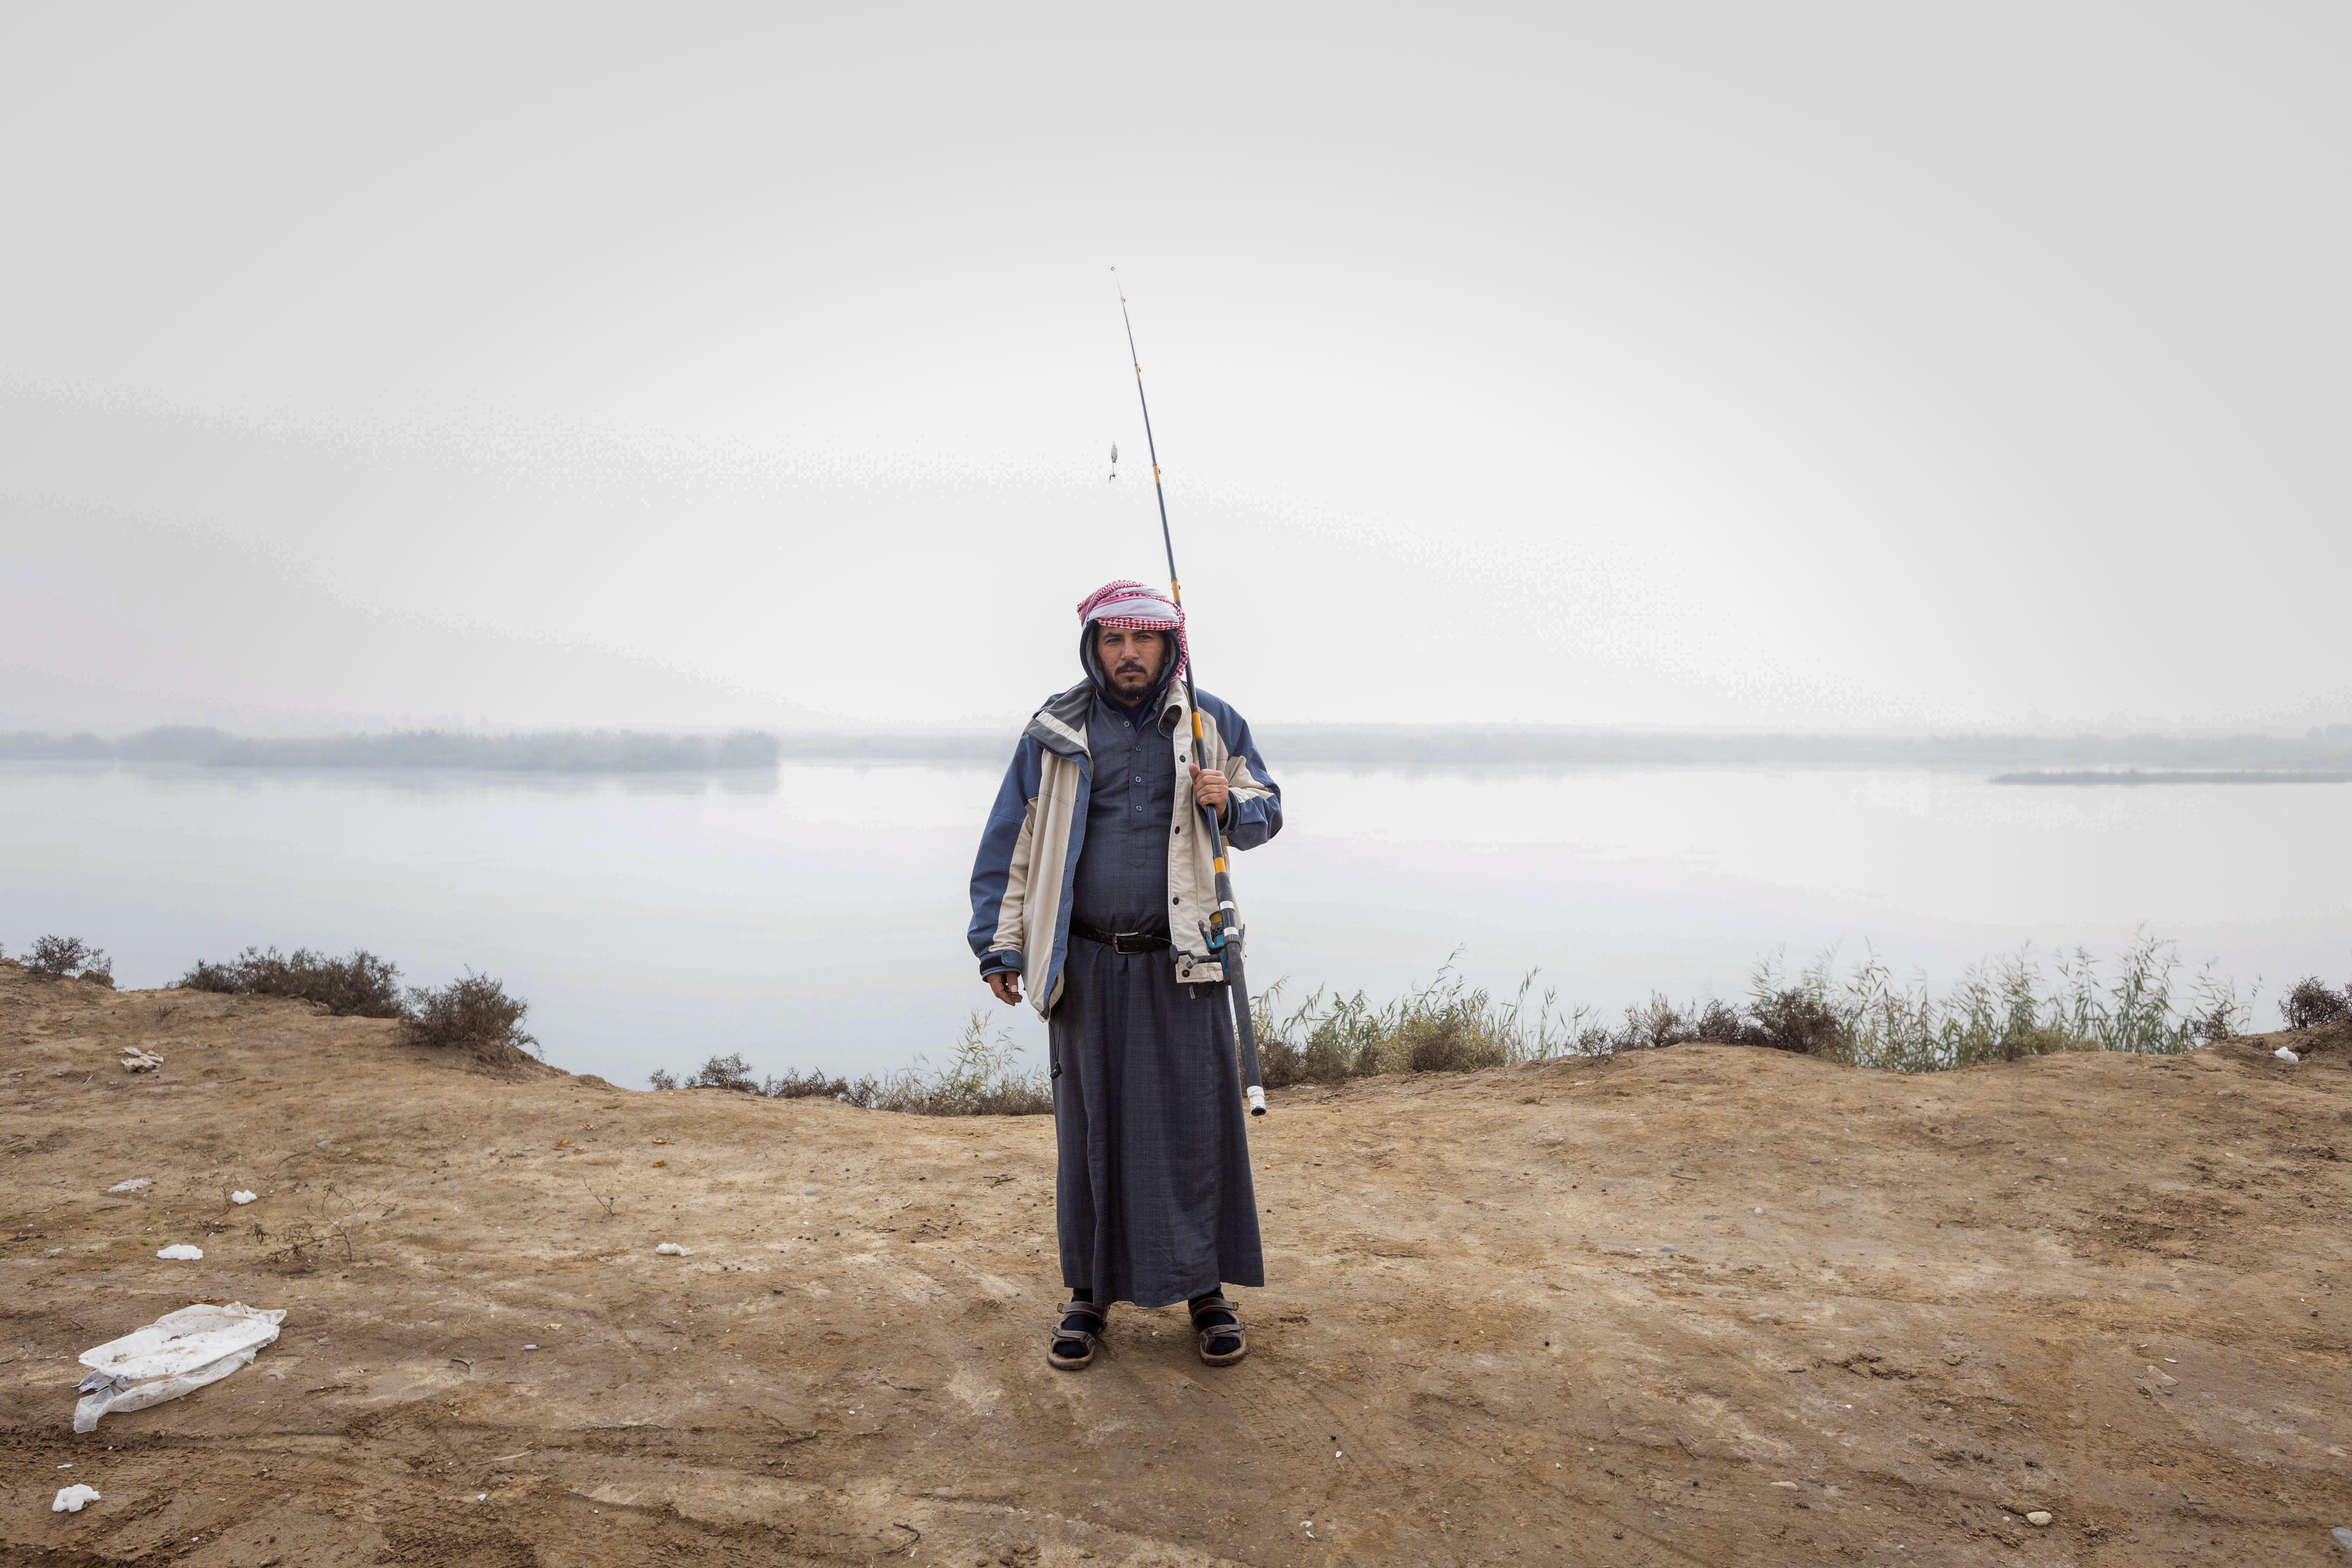 Salem*, a fisherman who recently recovered from cholera, stands by the Euphrates River. He had received full health care from the International Rescue Committee (IRC), besides awareness and education sessions for him and his family.